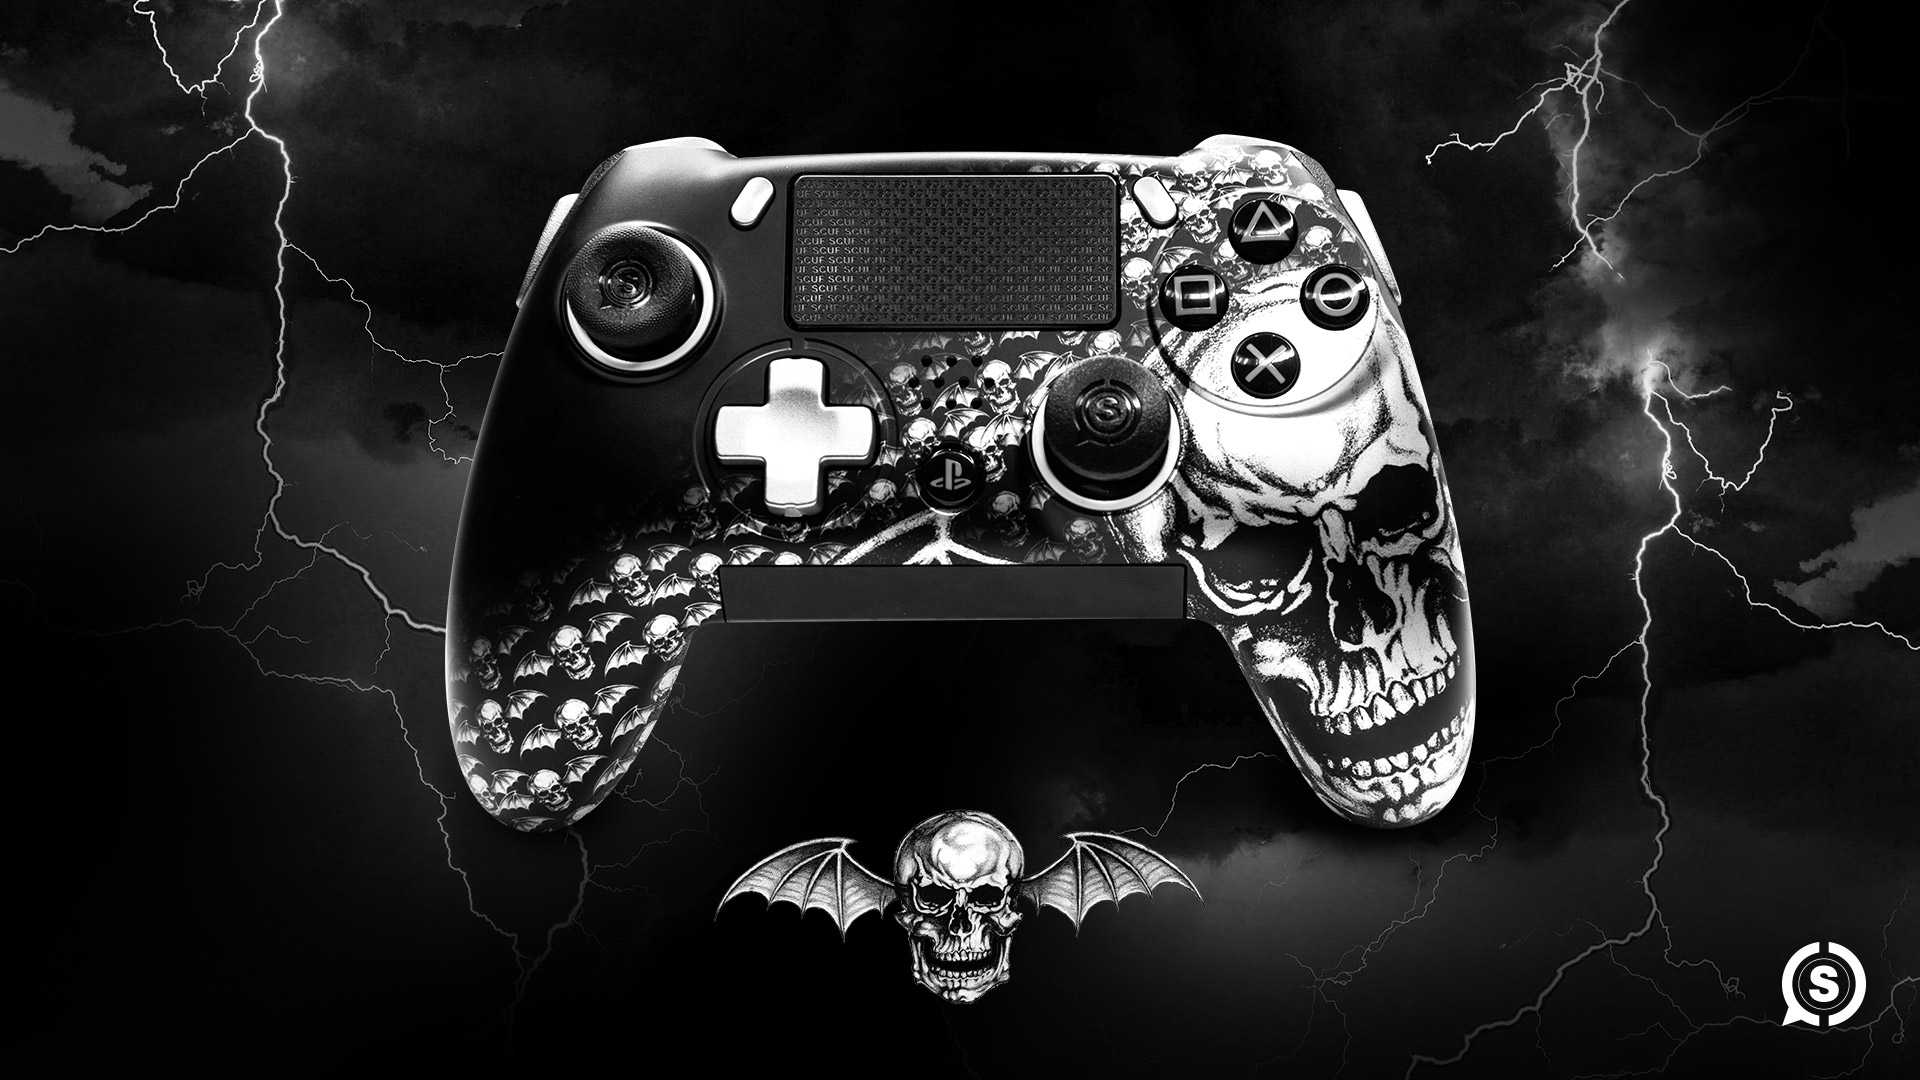 New Avenged Sevenfold Vantage Controller For PS4 Announced ... - 